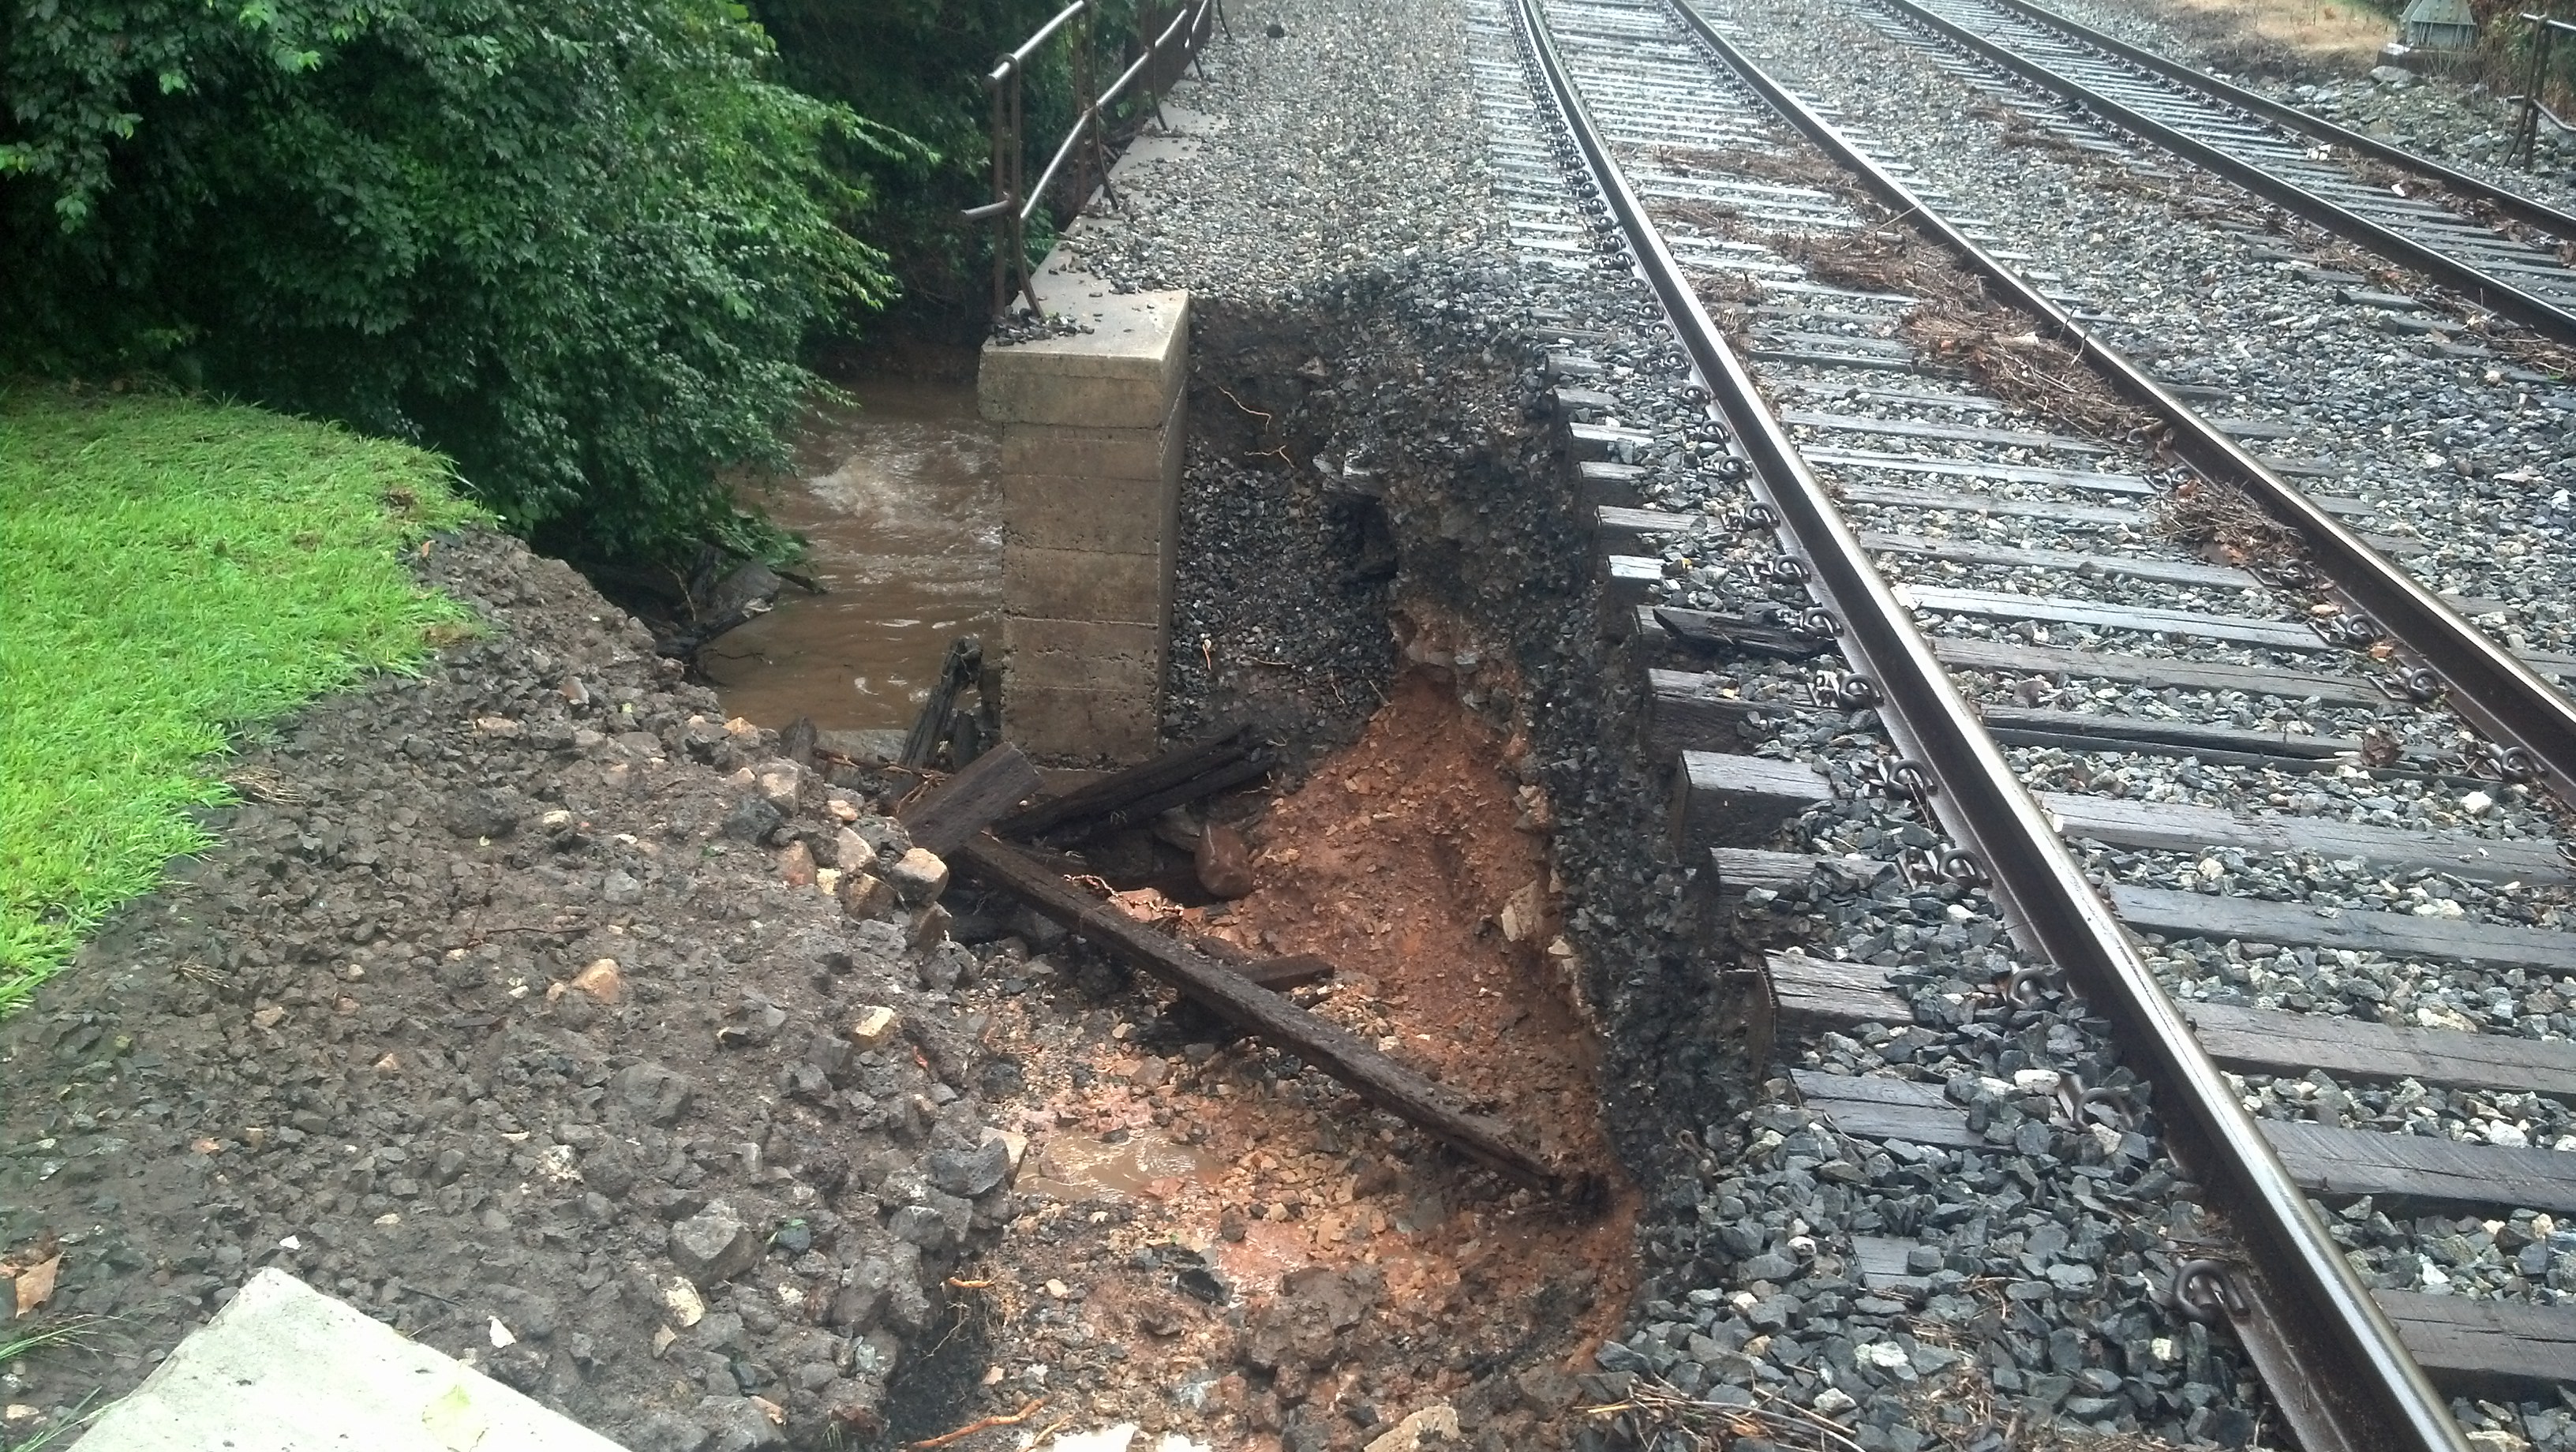 Track damage near Spring Mill Station on the Manayunk/Norristown Line, Photo Credit SEPTA